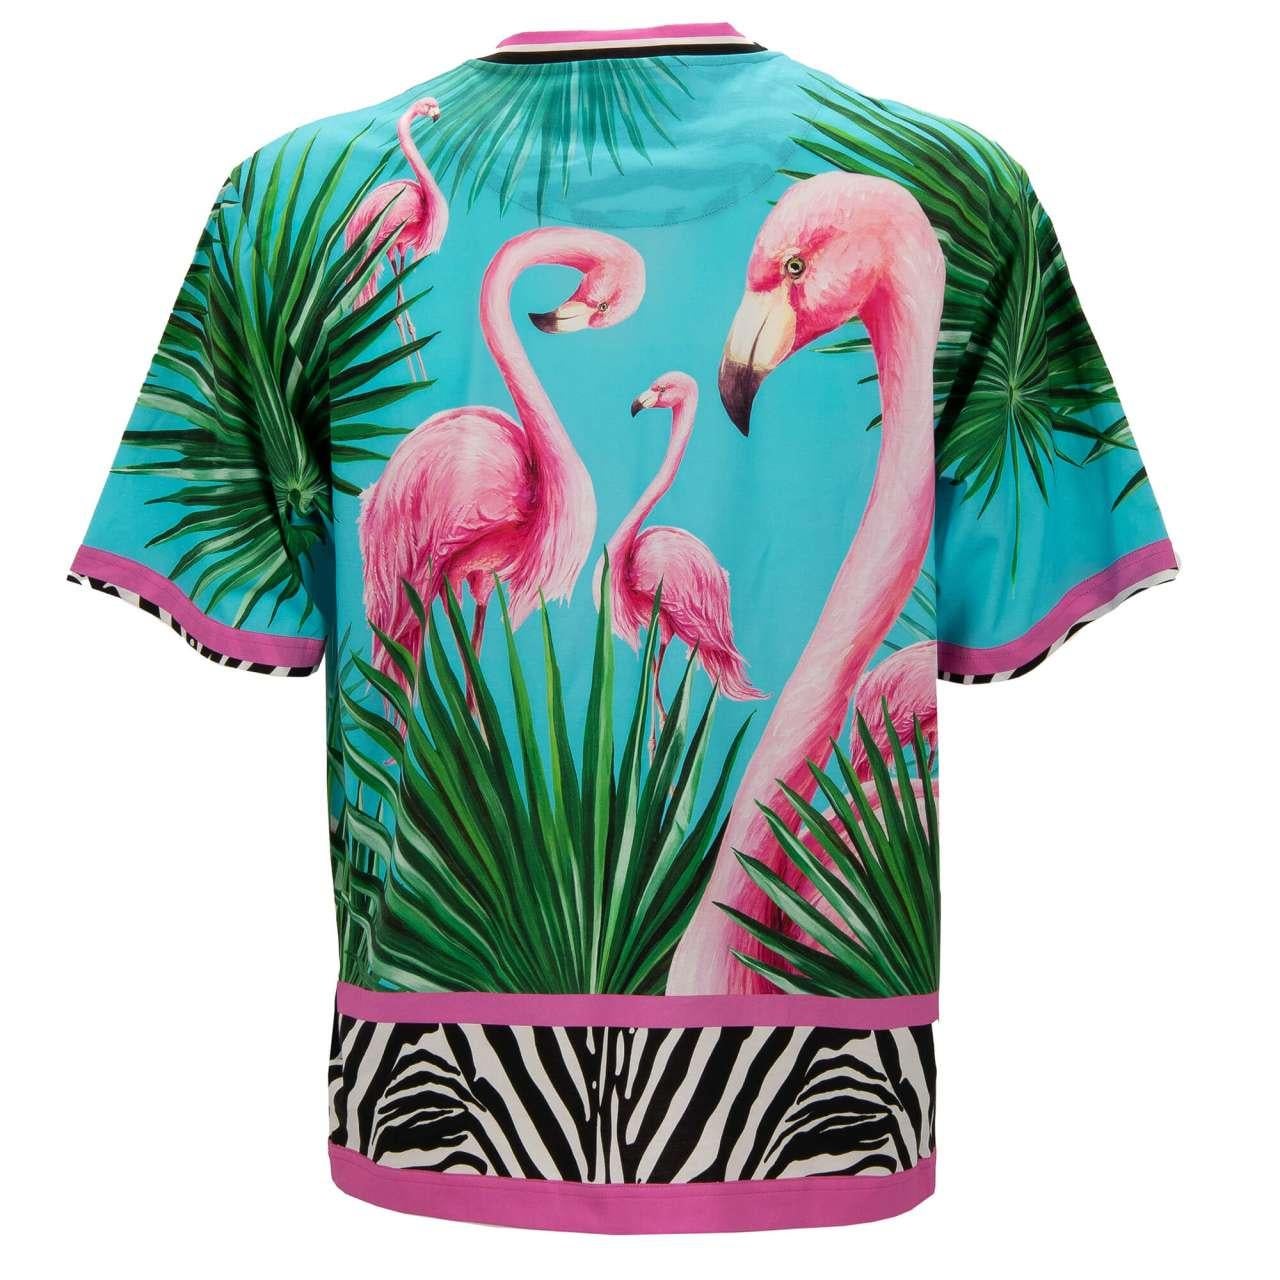 - Oversize Cotton T-Shirt with Flamingo, Zebra and Logo print by DOLCE & GABBANA x DJ KHALED Limited Edition - New with tag - MADE IN ITALY - Former RRP: EUR 575 - Oversize F- Modell: I8ABLM-G7BNX-W1234 - Material: 100% Cotton - Color: Blue / Pink /